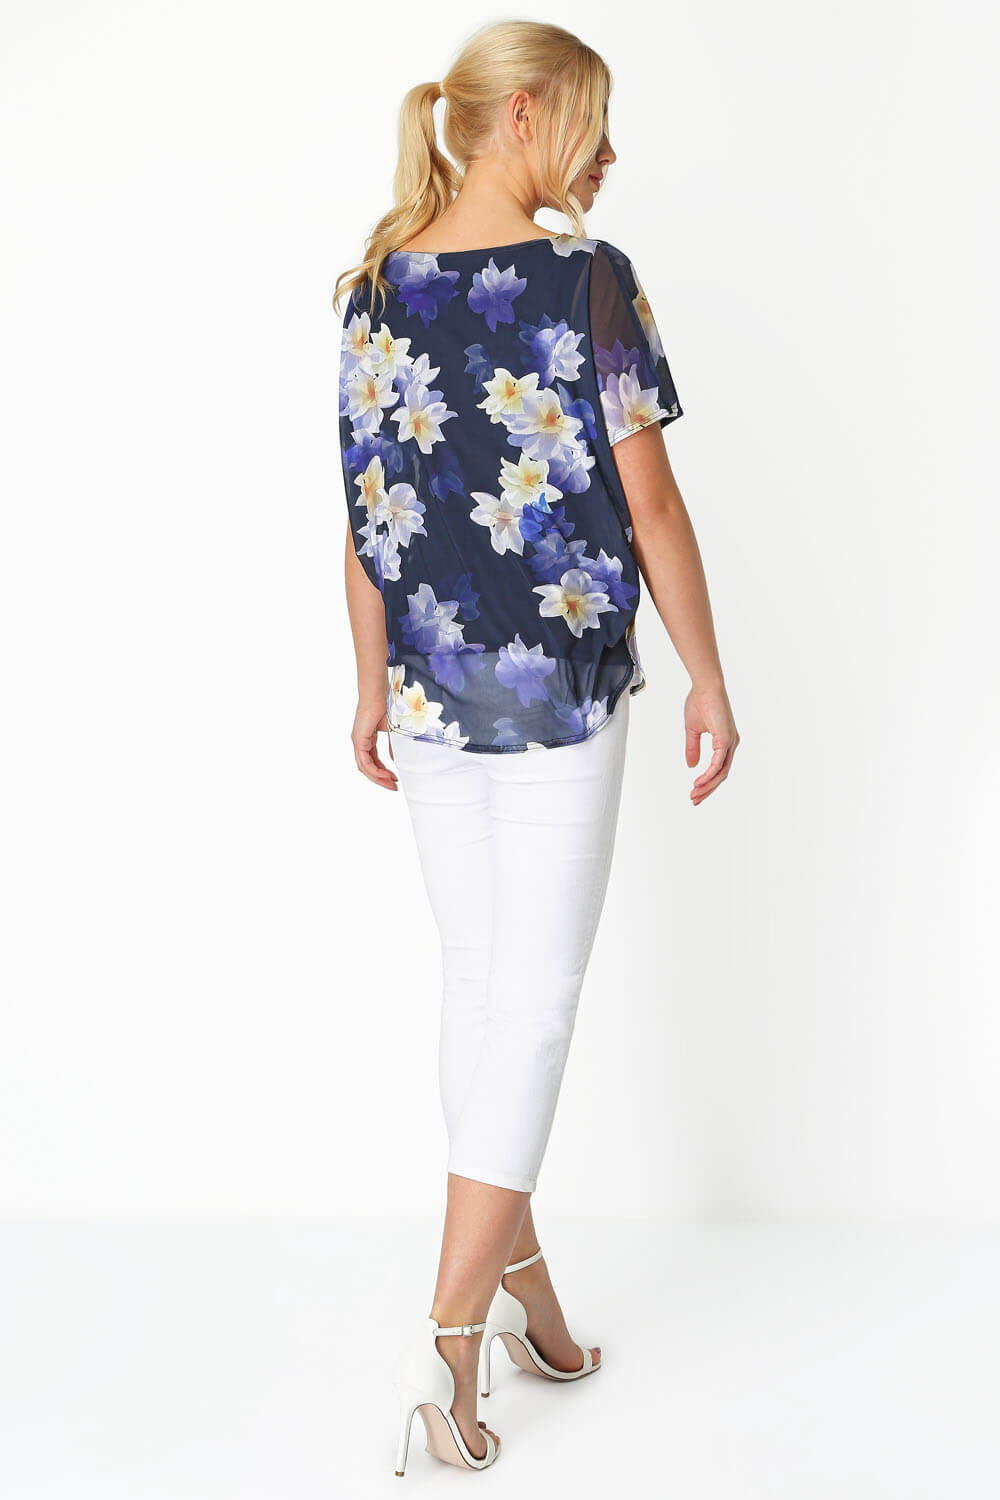 Blue Floral Chiffon Overlay Top, Image 3 of 8